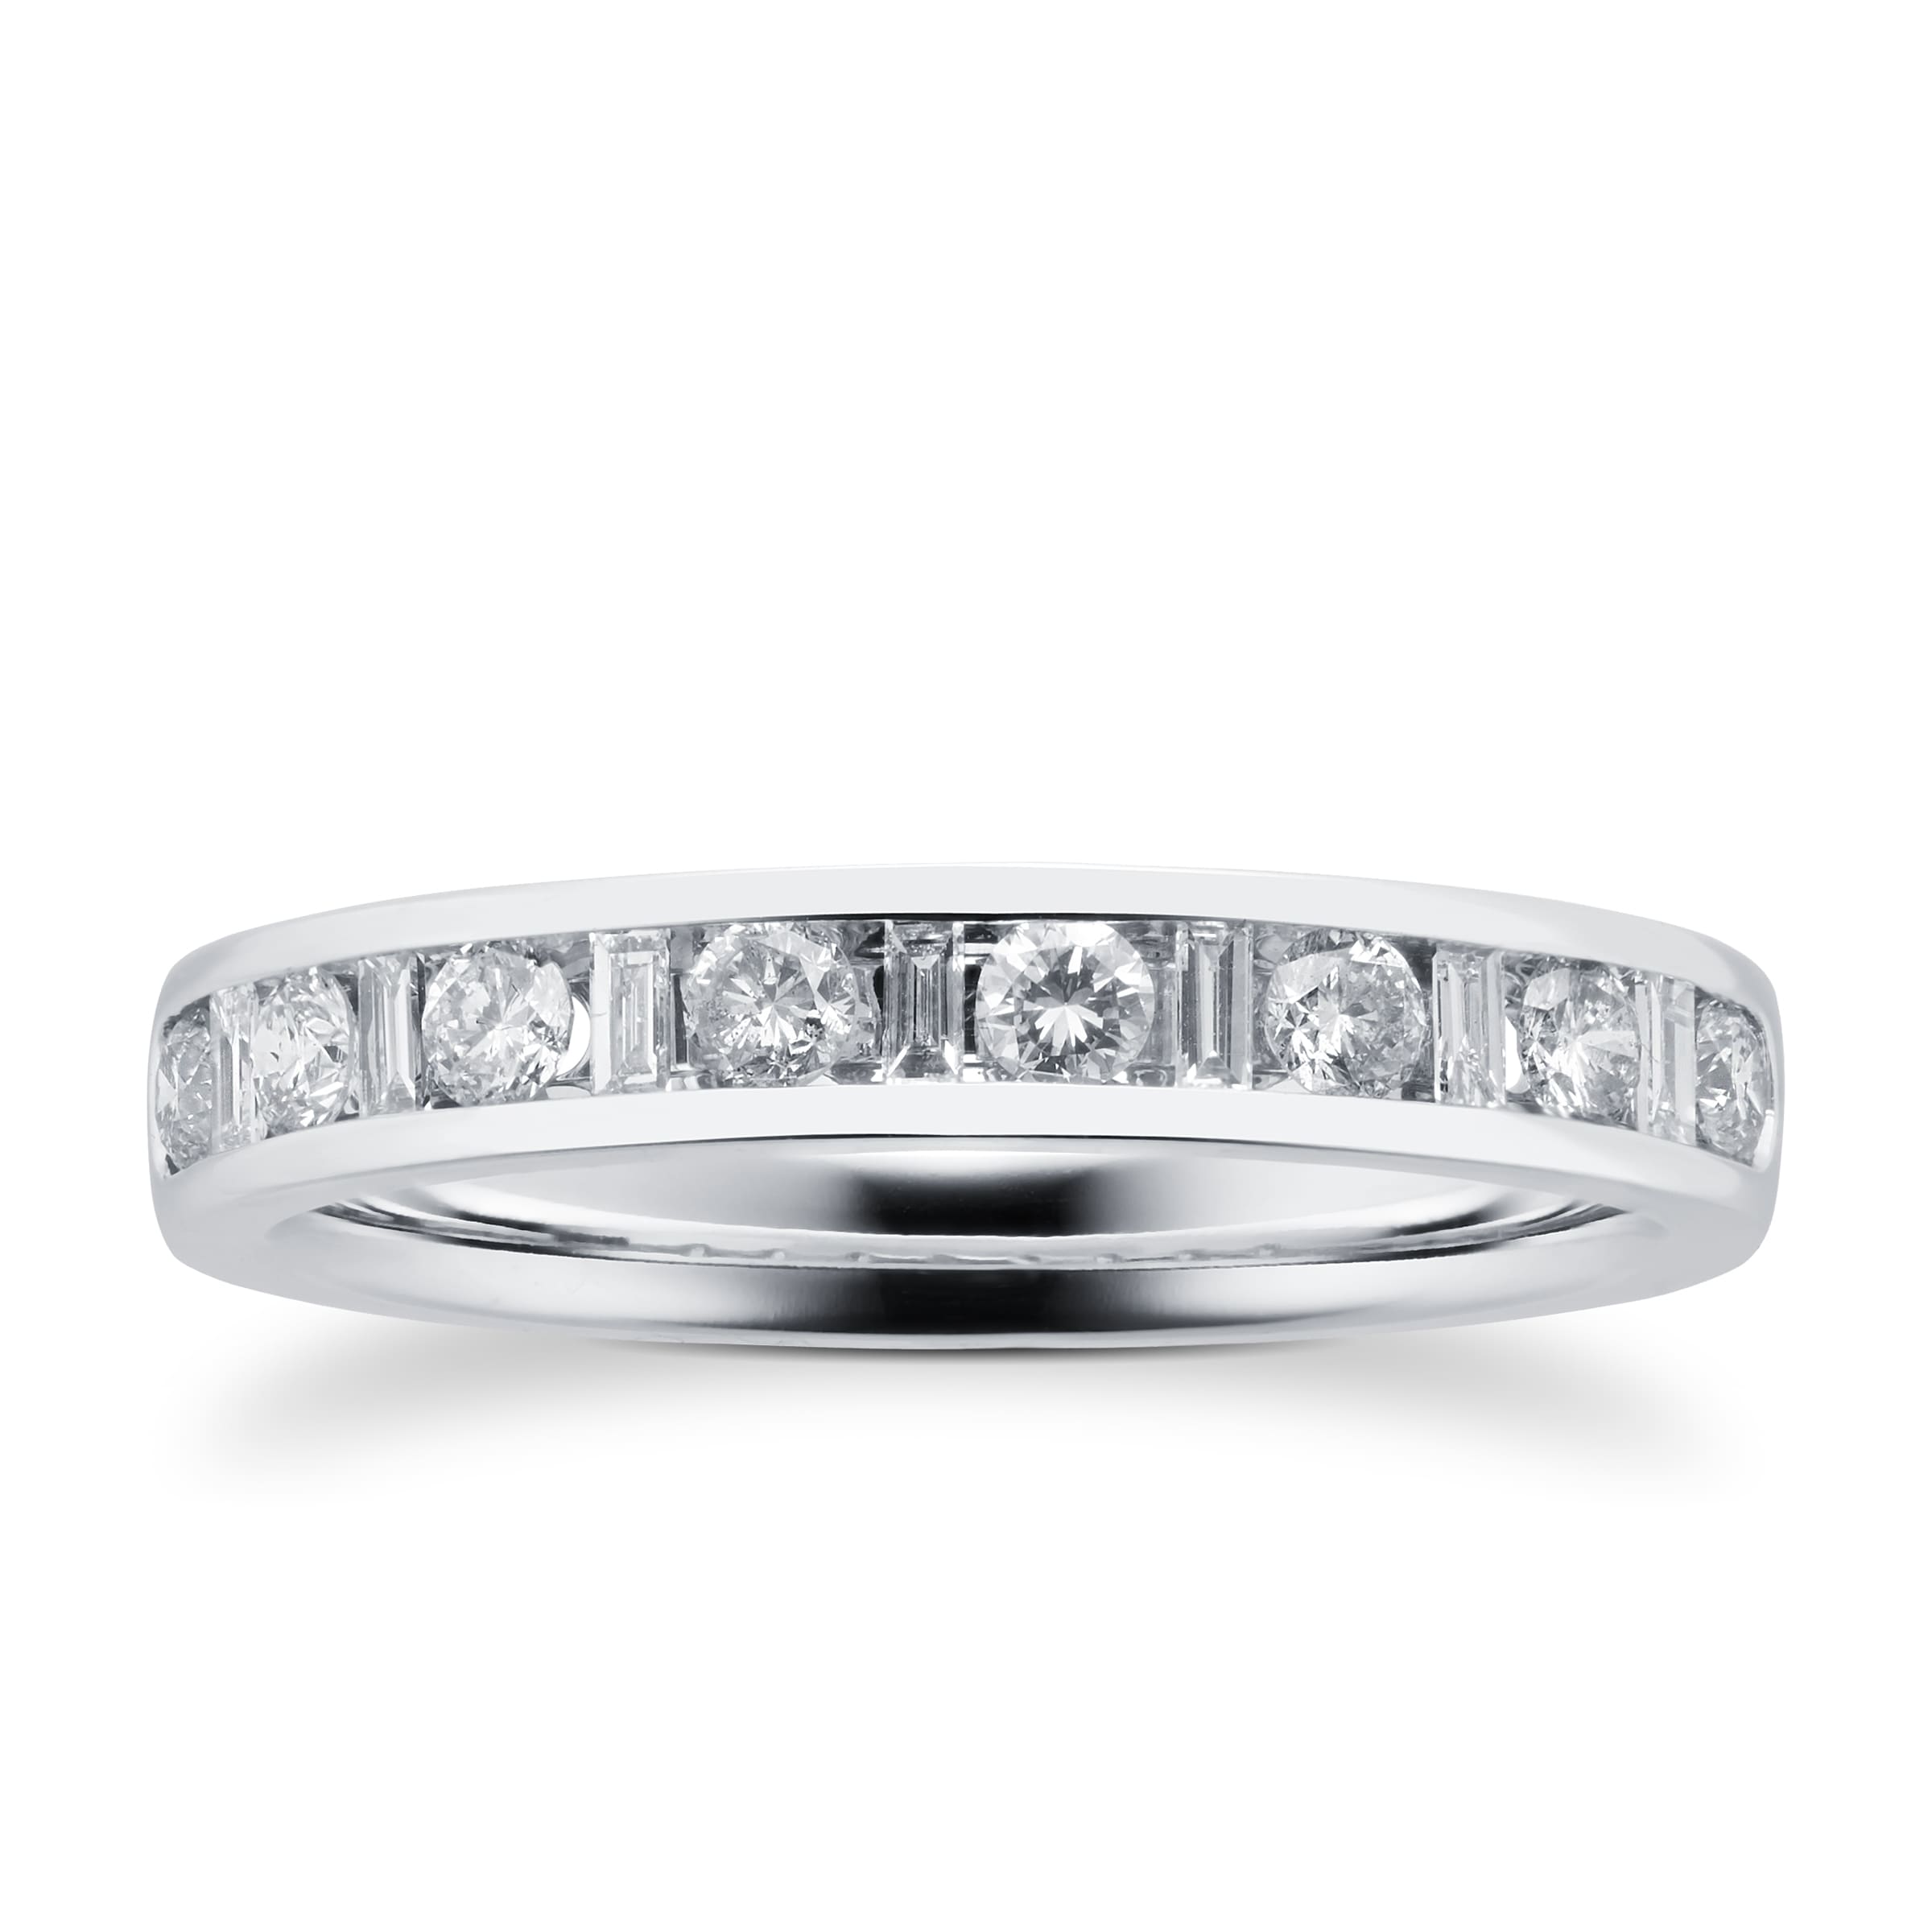 Baguette And Brilliant Cut 0.50 Carat Total Weight Diamond Half Eternity Ring In 18 Carat White Gold - Ring Size P